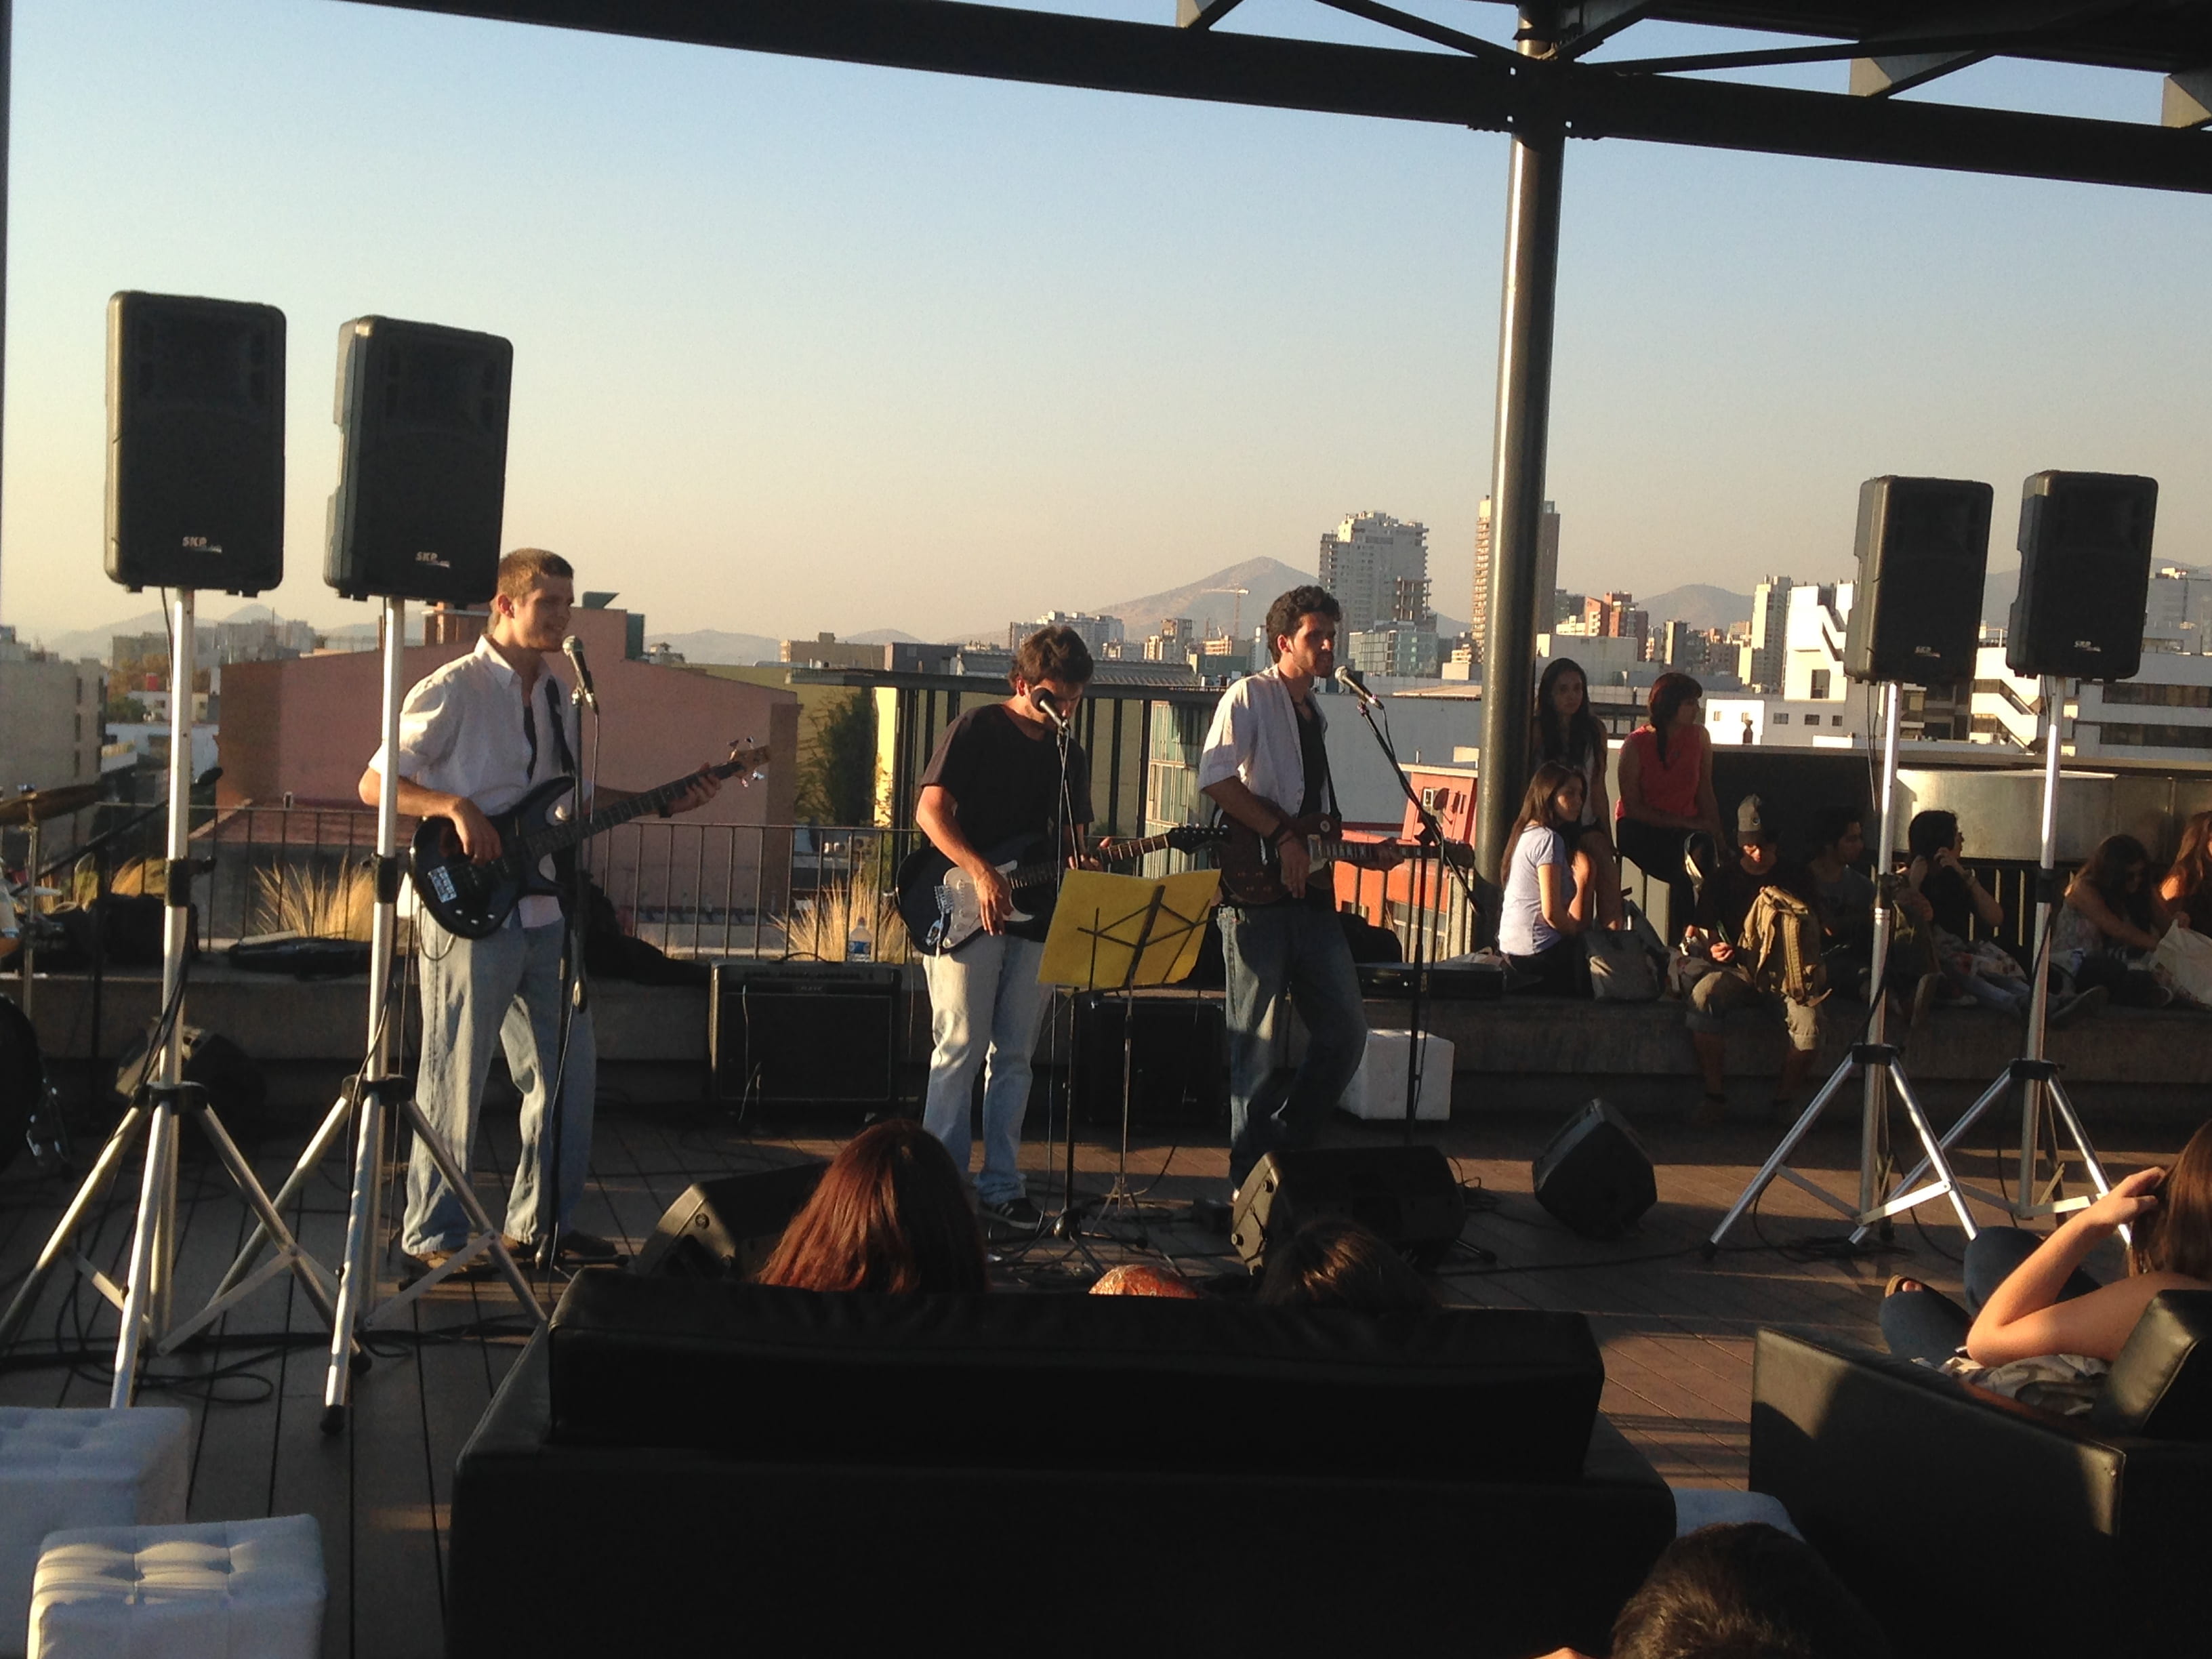 Student band performing on the rooftop.